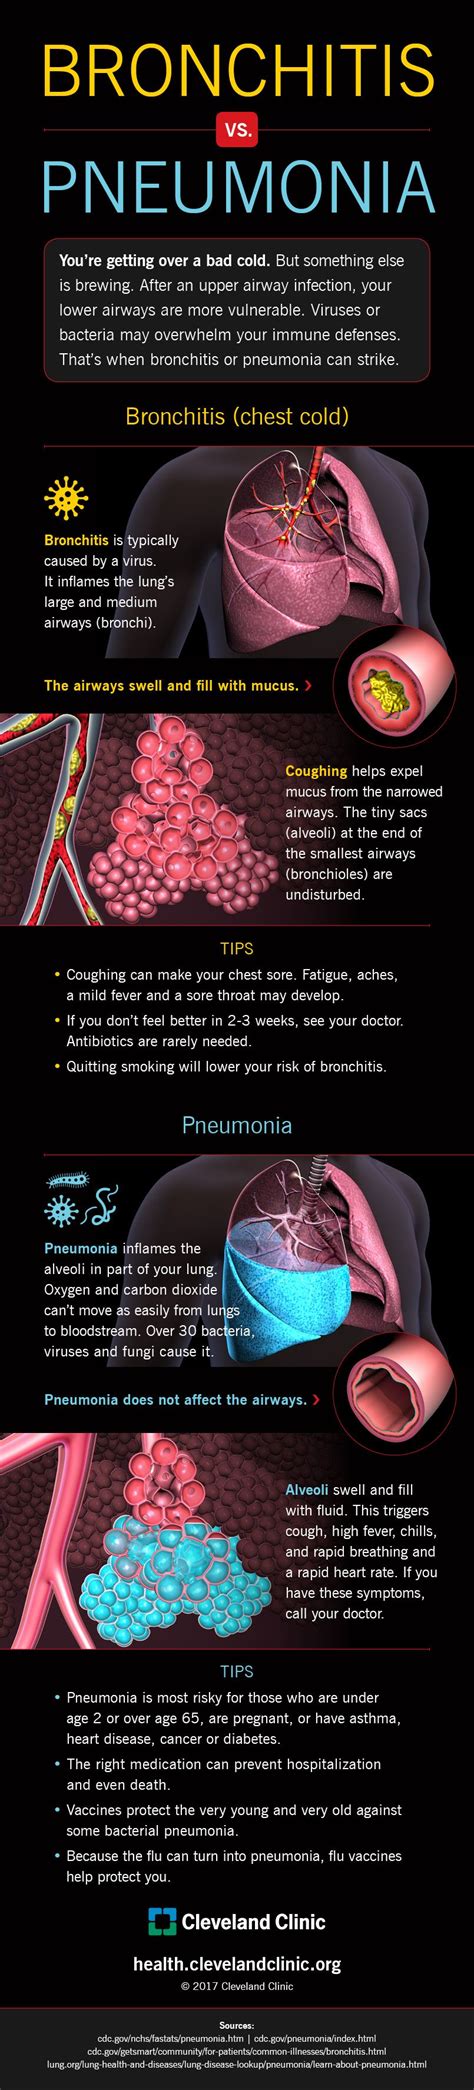 Feeling Lousy How To Tell If Its Bronchitis Or Pneumonia Infographic